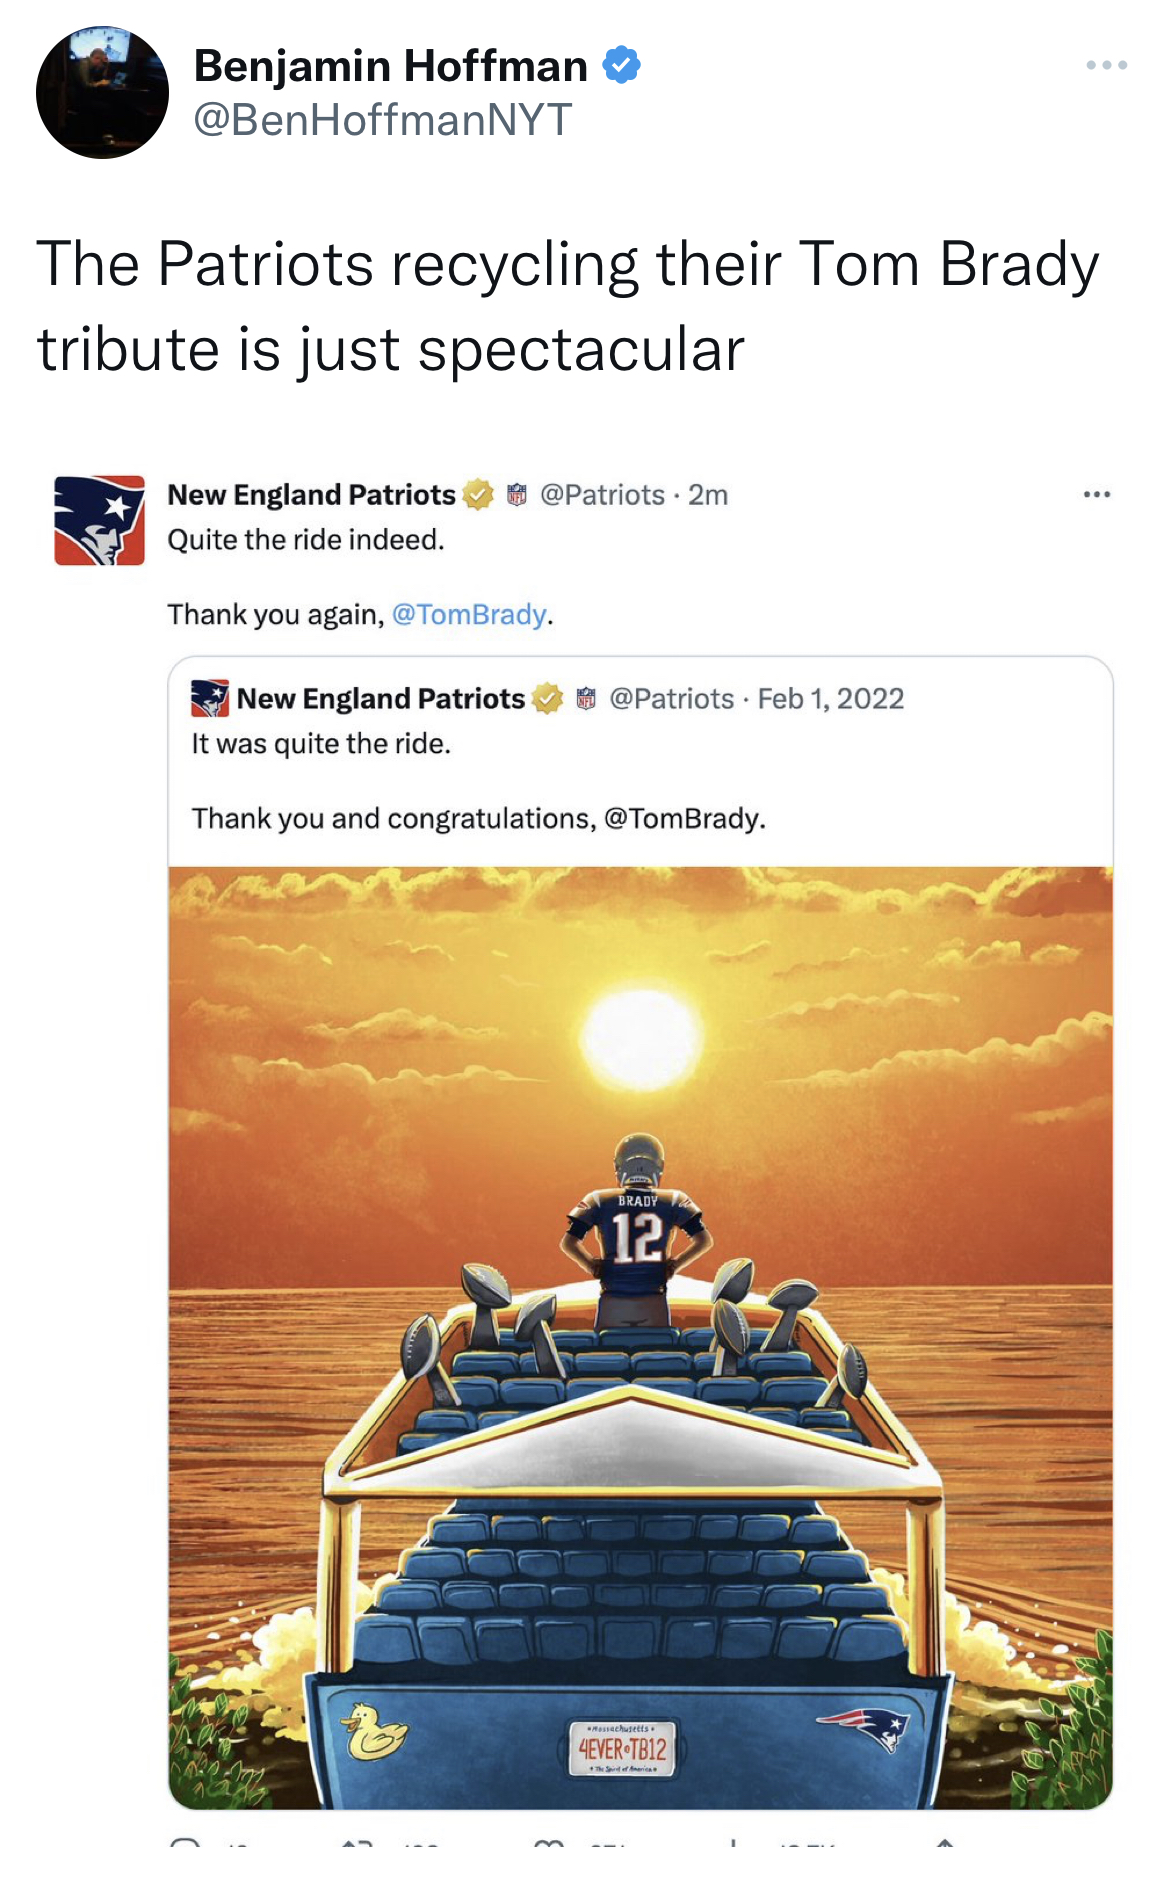 Tom Brady Retirement memes - water resources - Benjamin Hoffman The Patriots recycling their dy tribute is just spectacular New England Patriots @ @ Quite the ride indeed. Thank you again, , New England Patriots 1, 2022 It was quite the ride. Thank you an